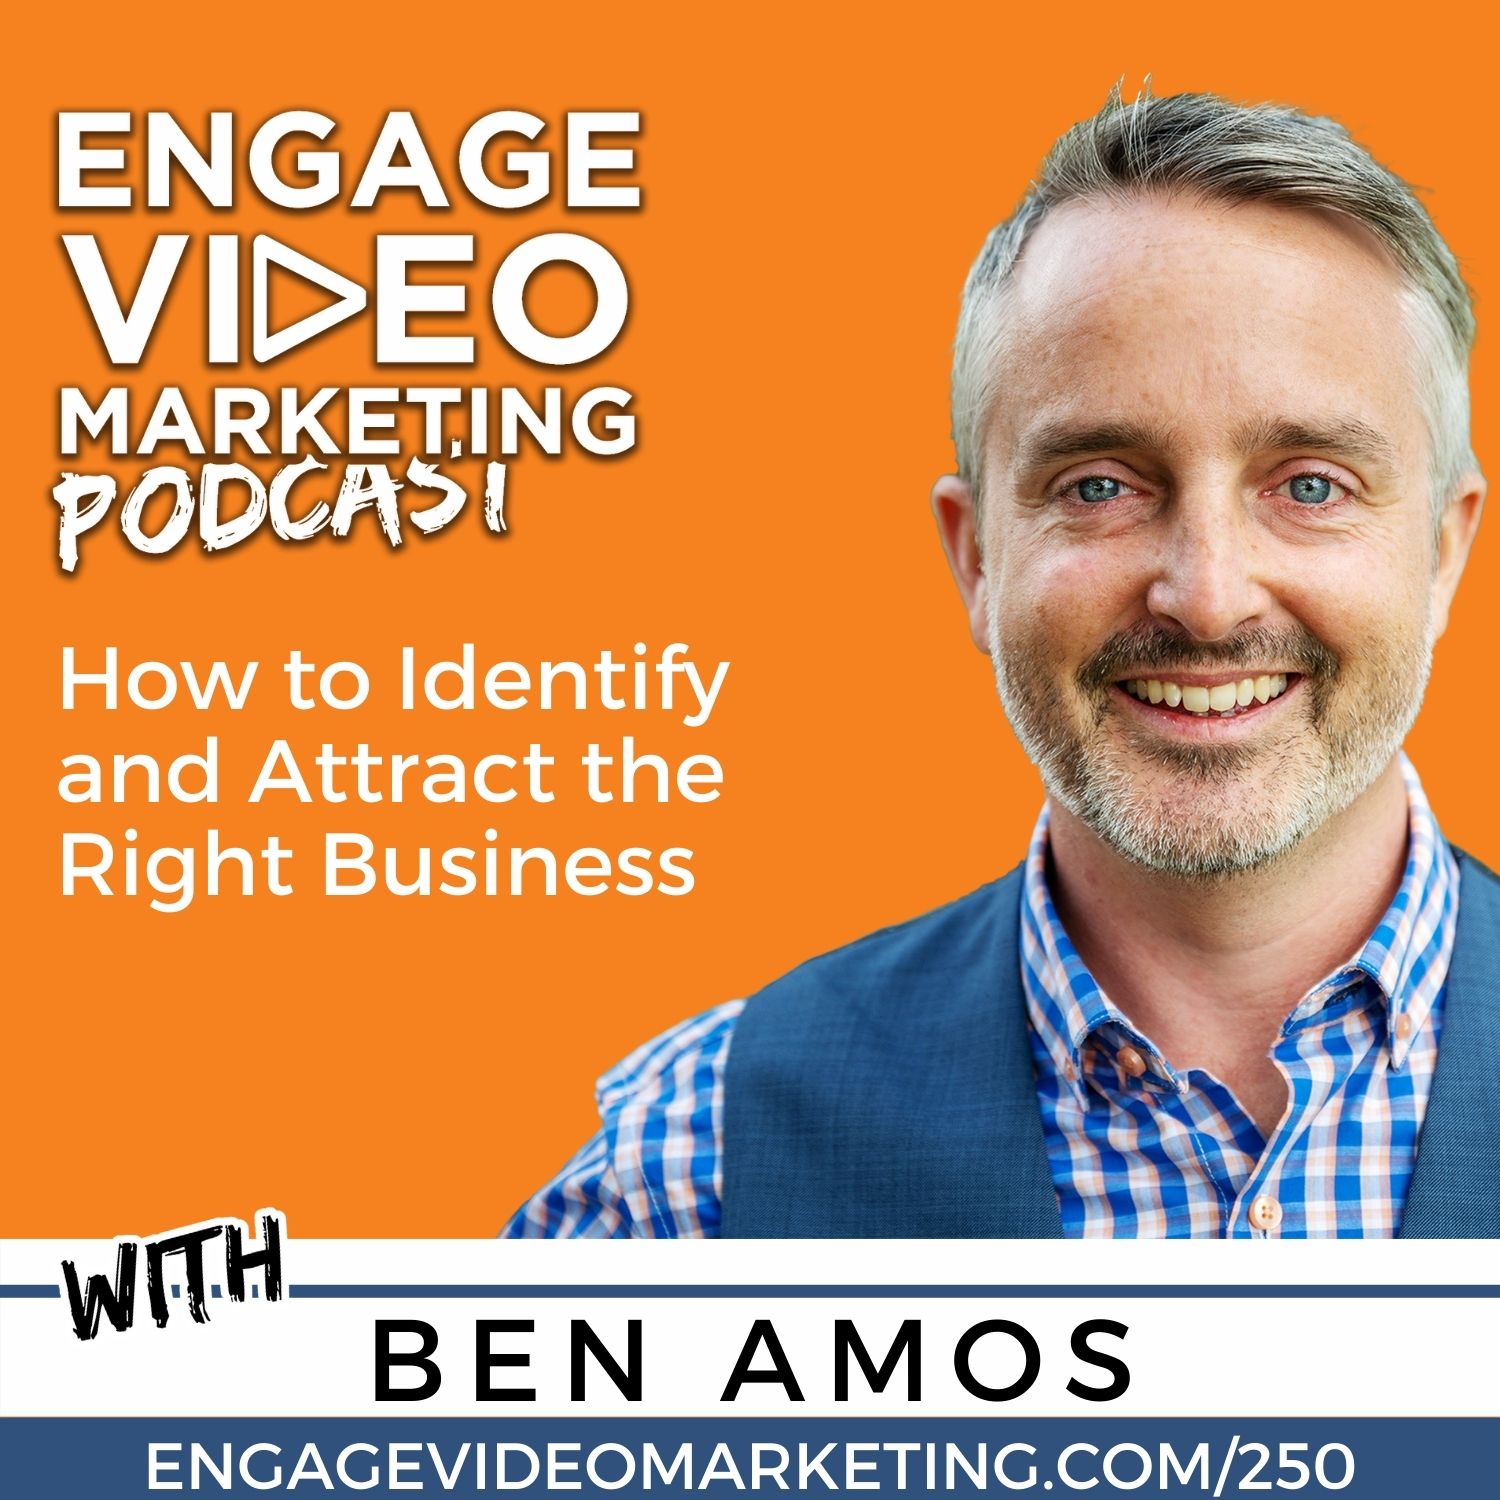 How to Identify and Attract the Right Business with Ben Amos